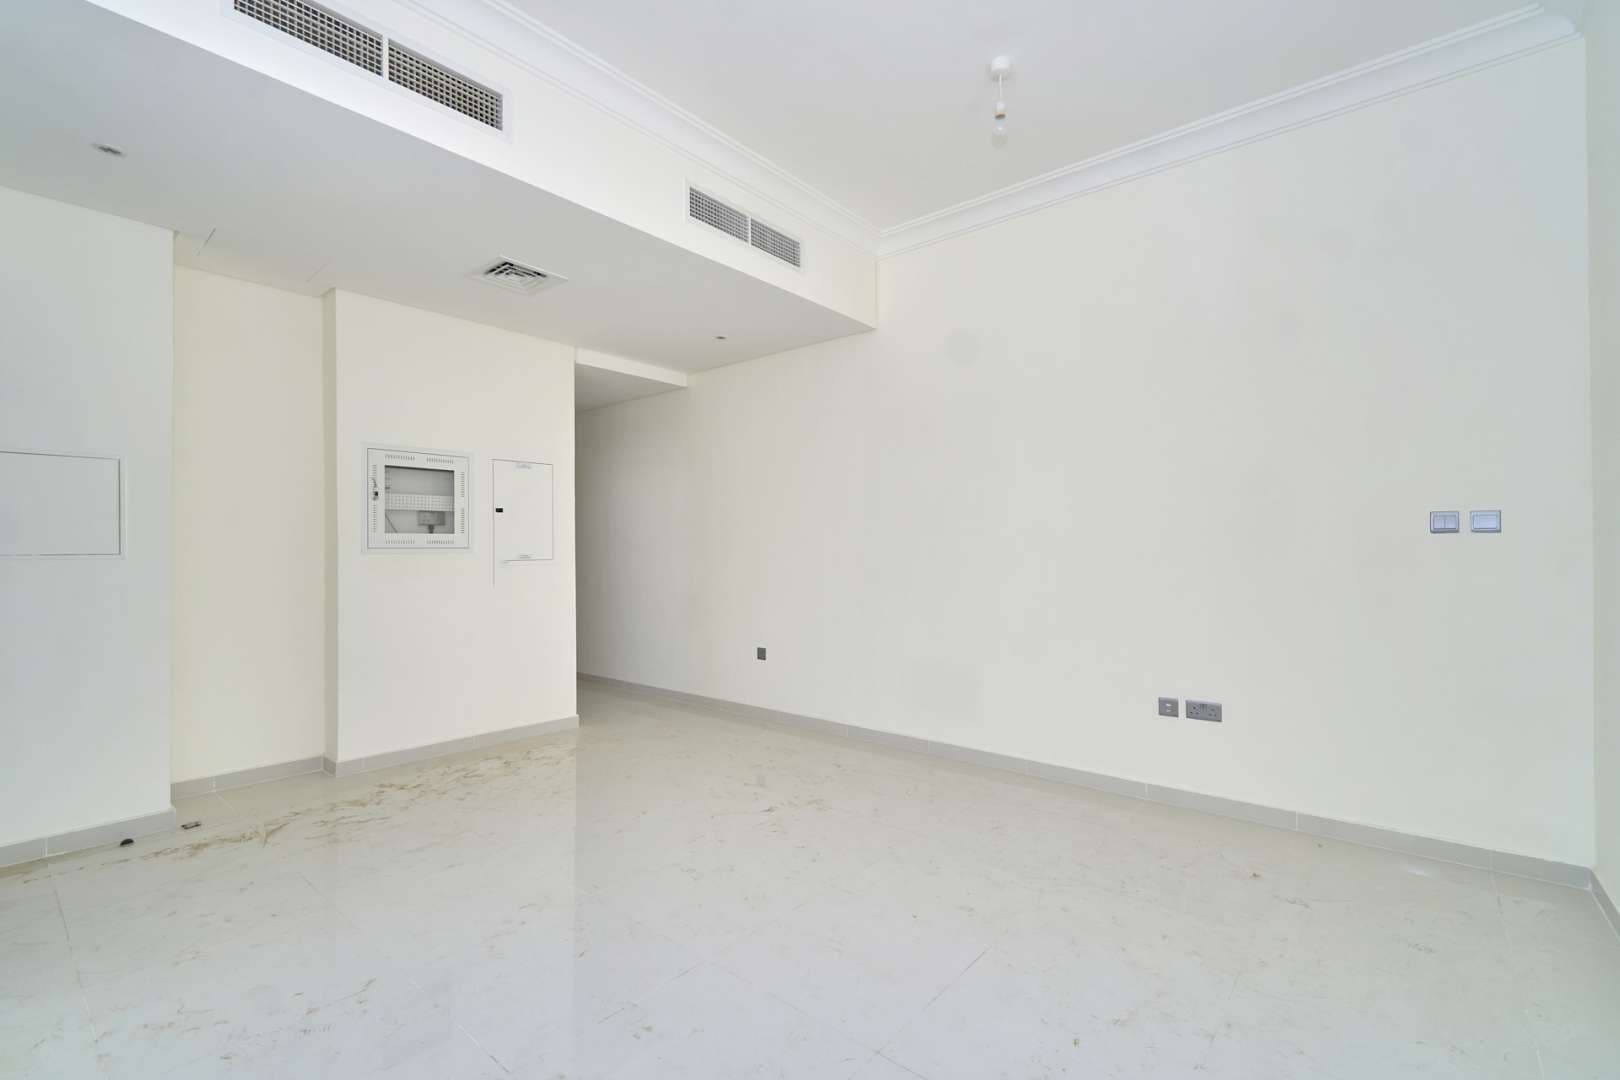 3 Bedroom Townhouse For Rent Aster Lp07446 15f097c1ecf6e400.jpg